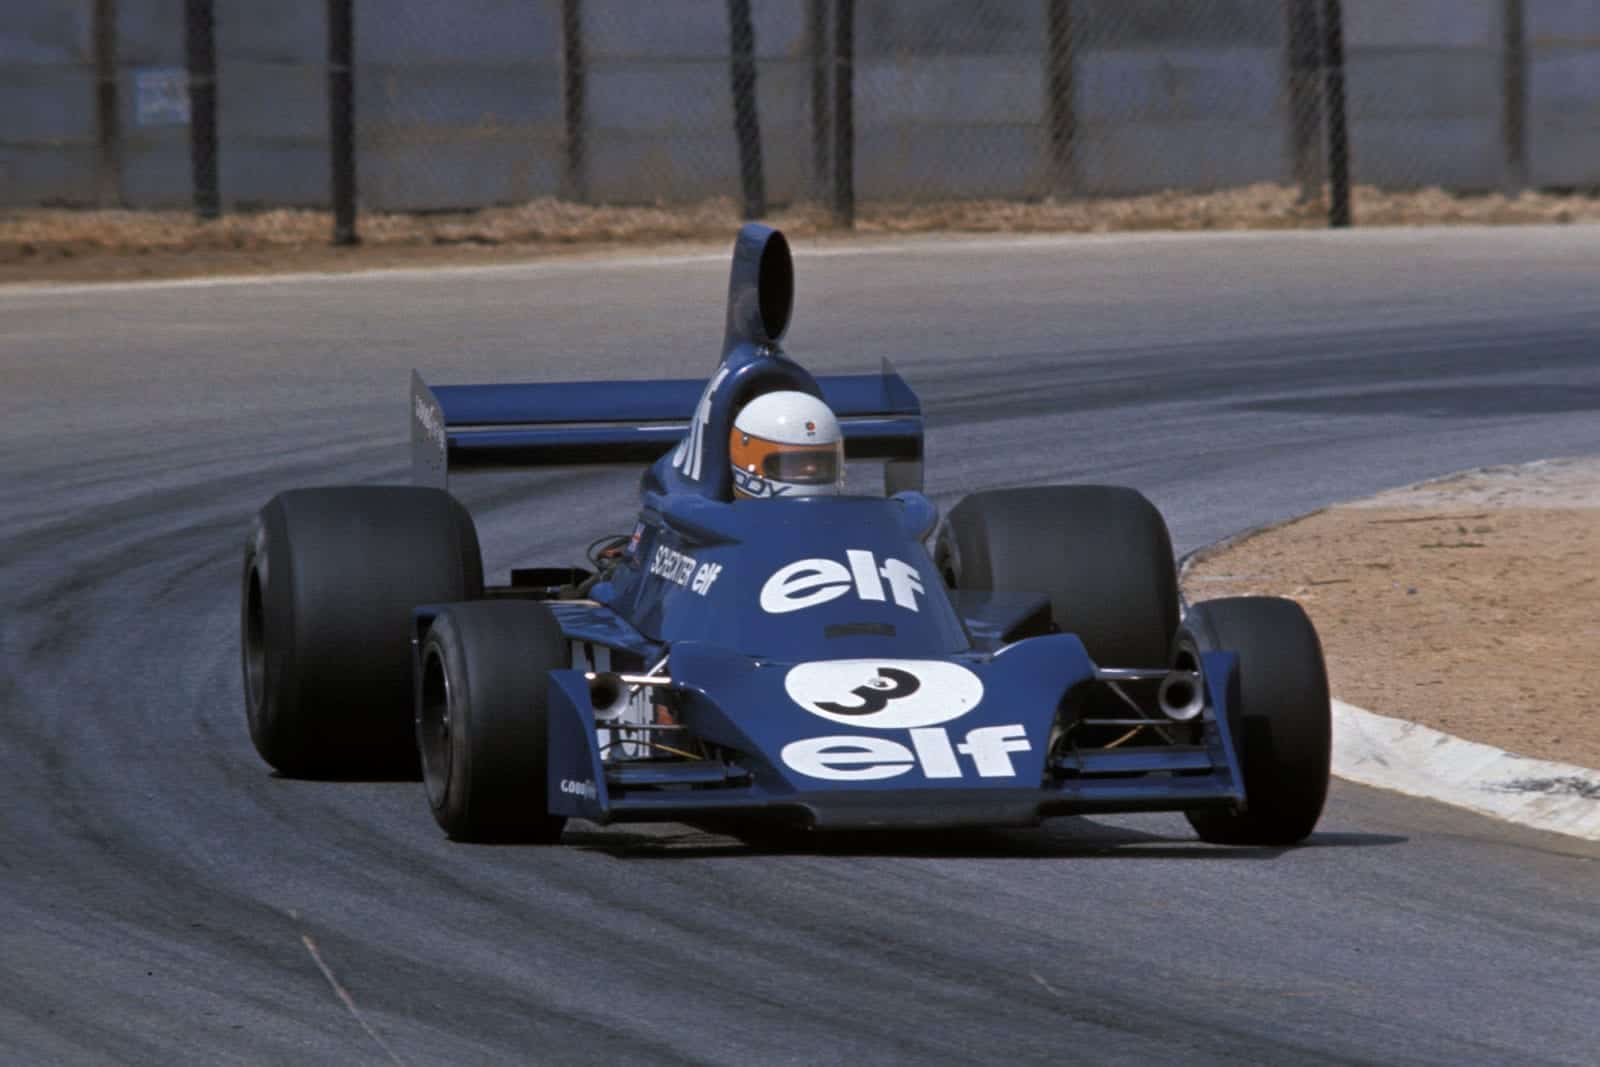 Jody Scheckter driving for Tyrrell at the 1975 South Afircan Grand Prix.